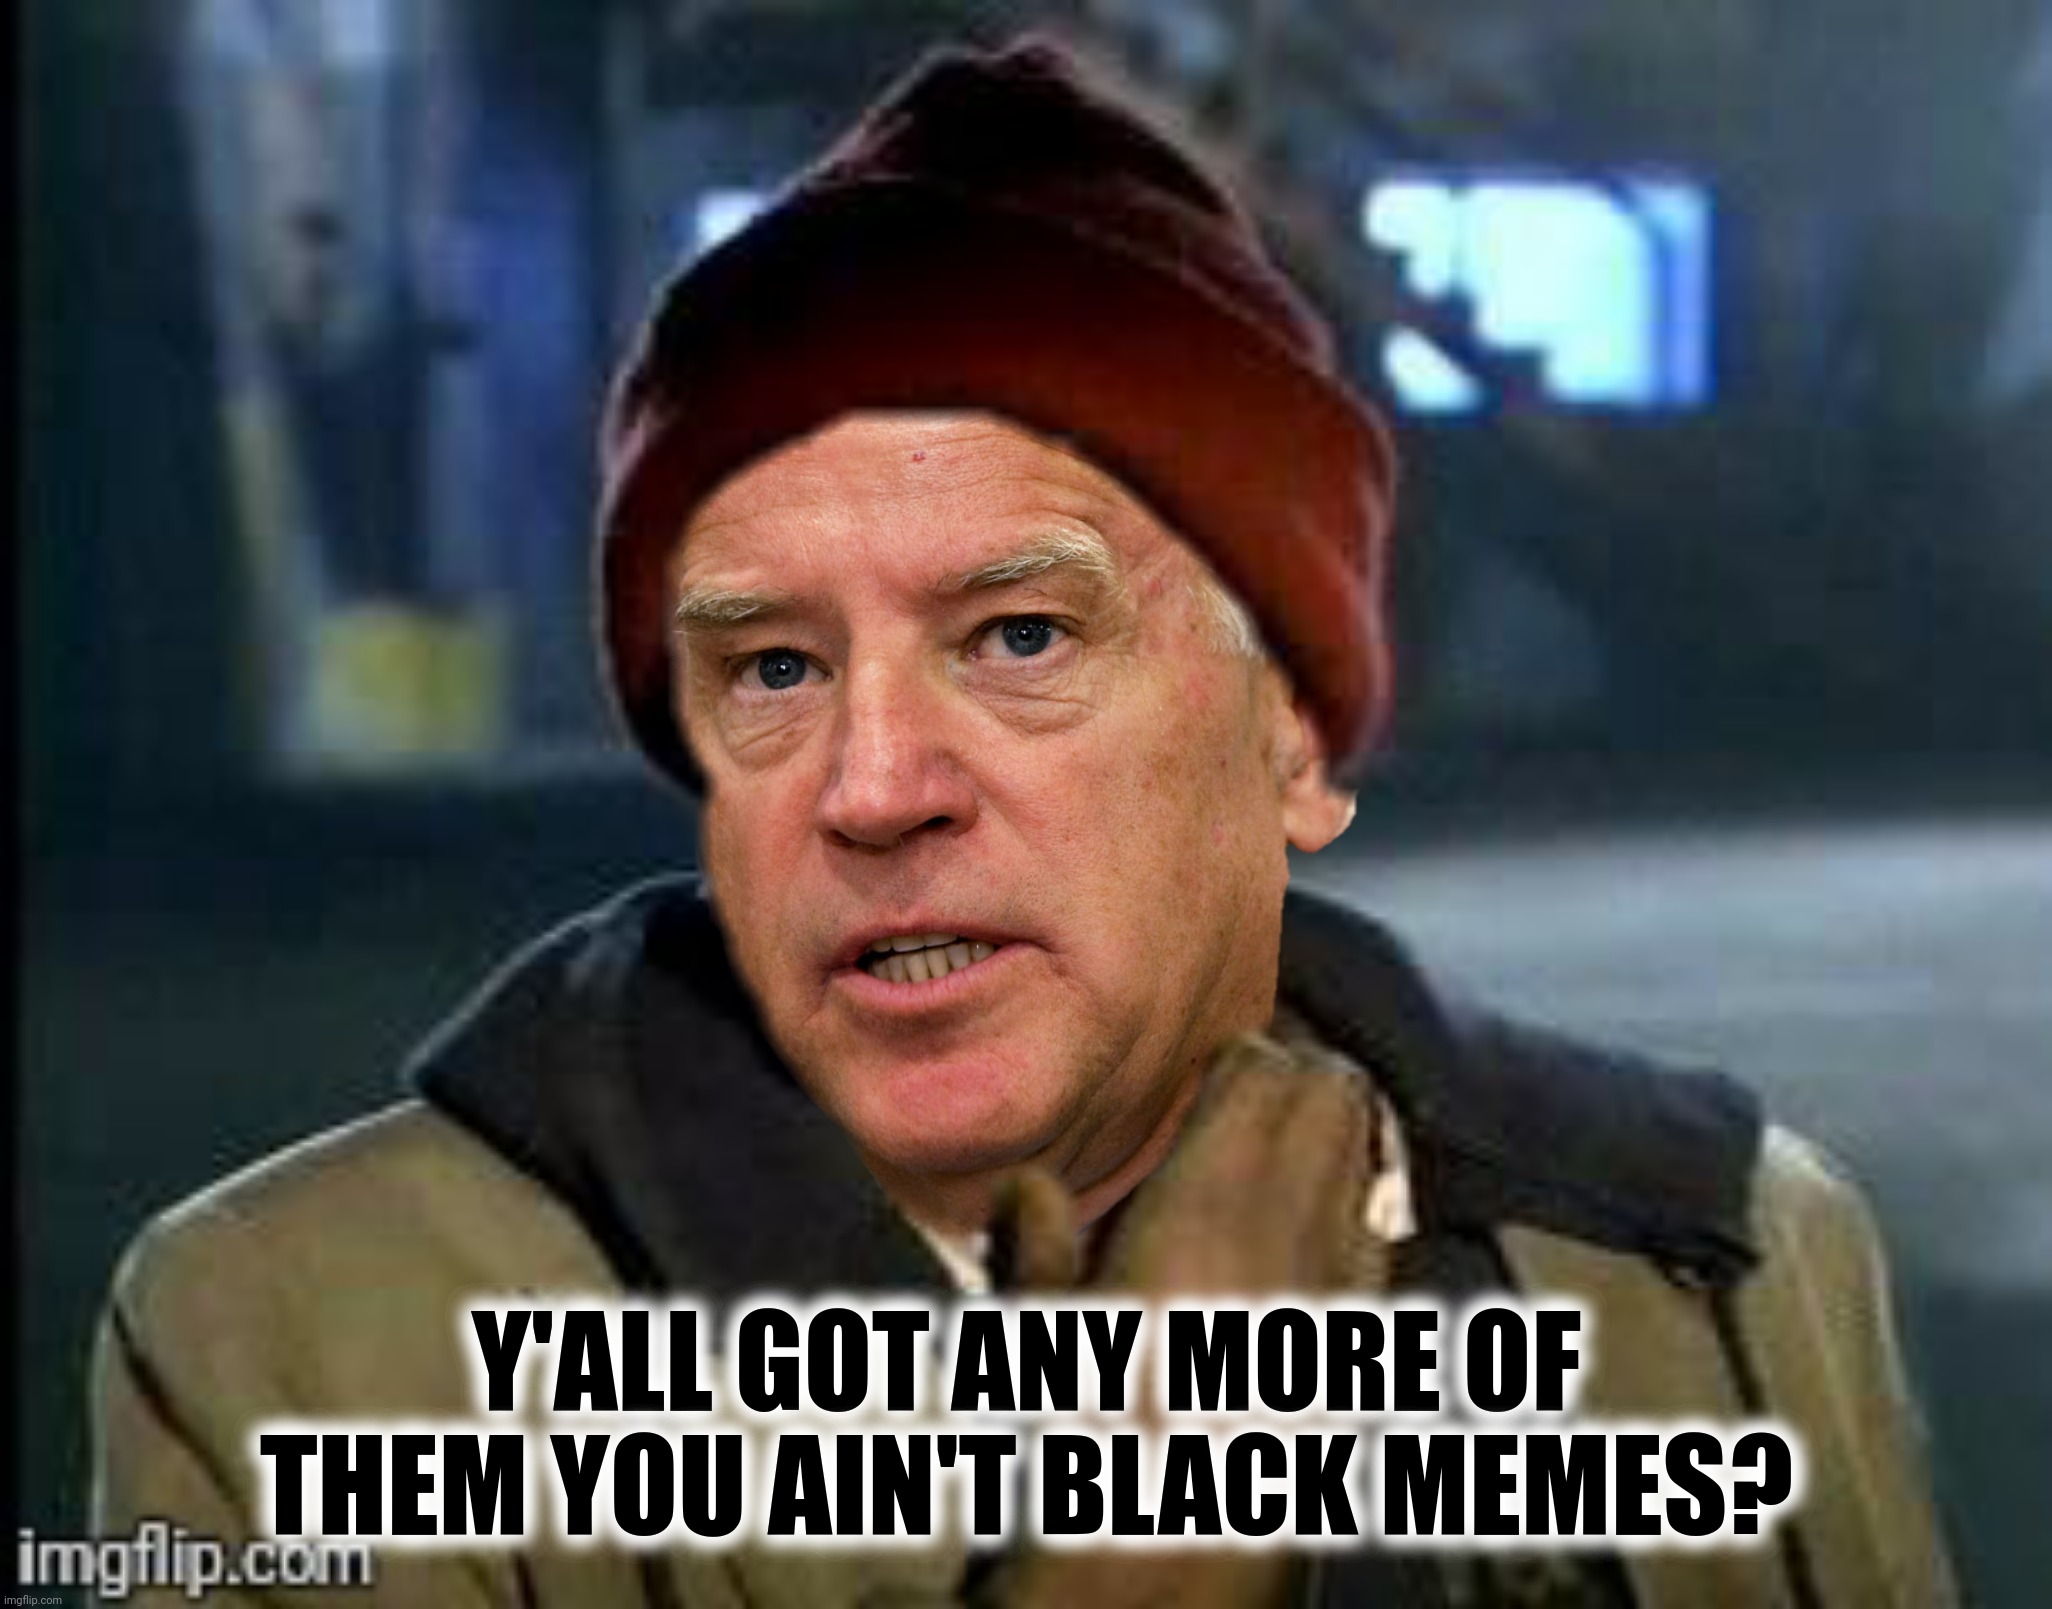 Y'ALL GOT ANY MORE OF THEM YOU AIN'T BLACK MEMES? | made w/ Imgflip meme maker